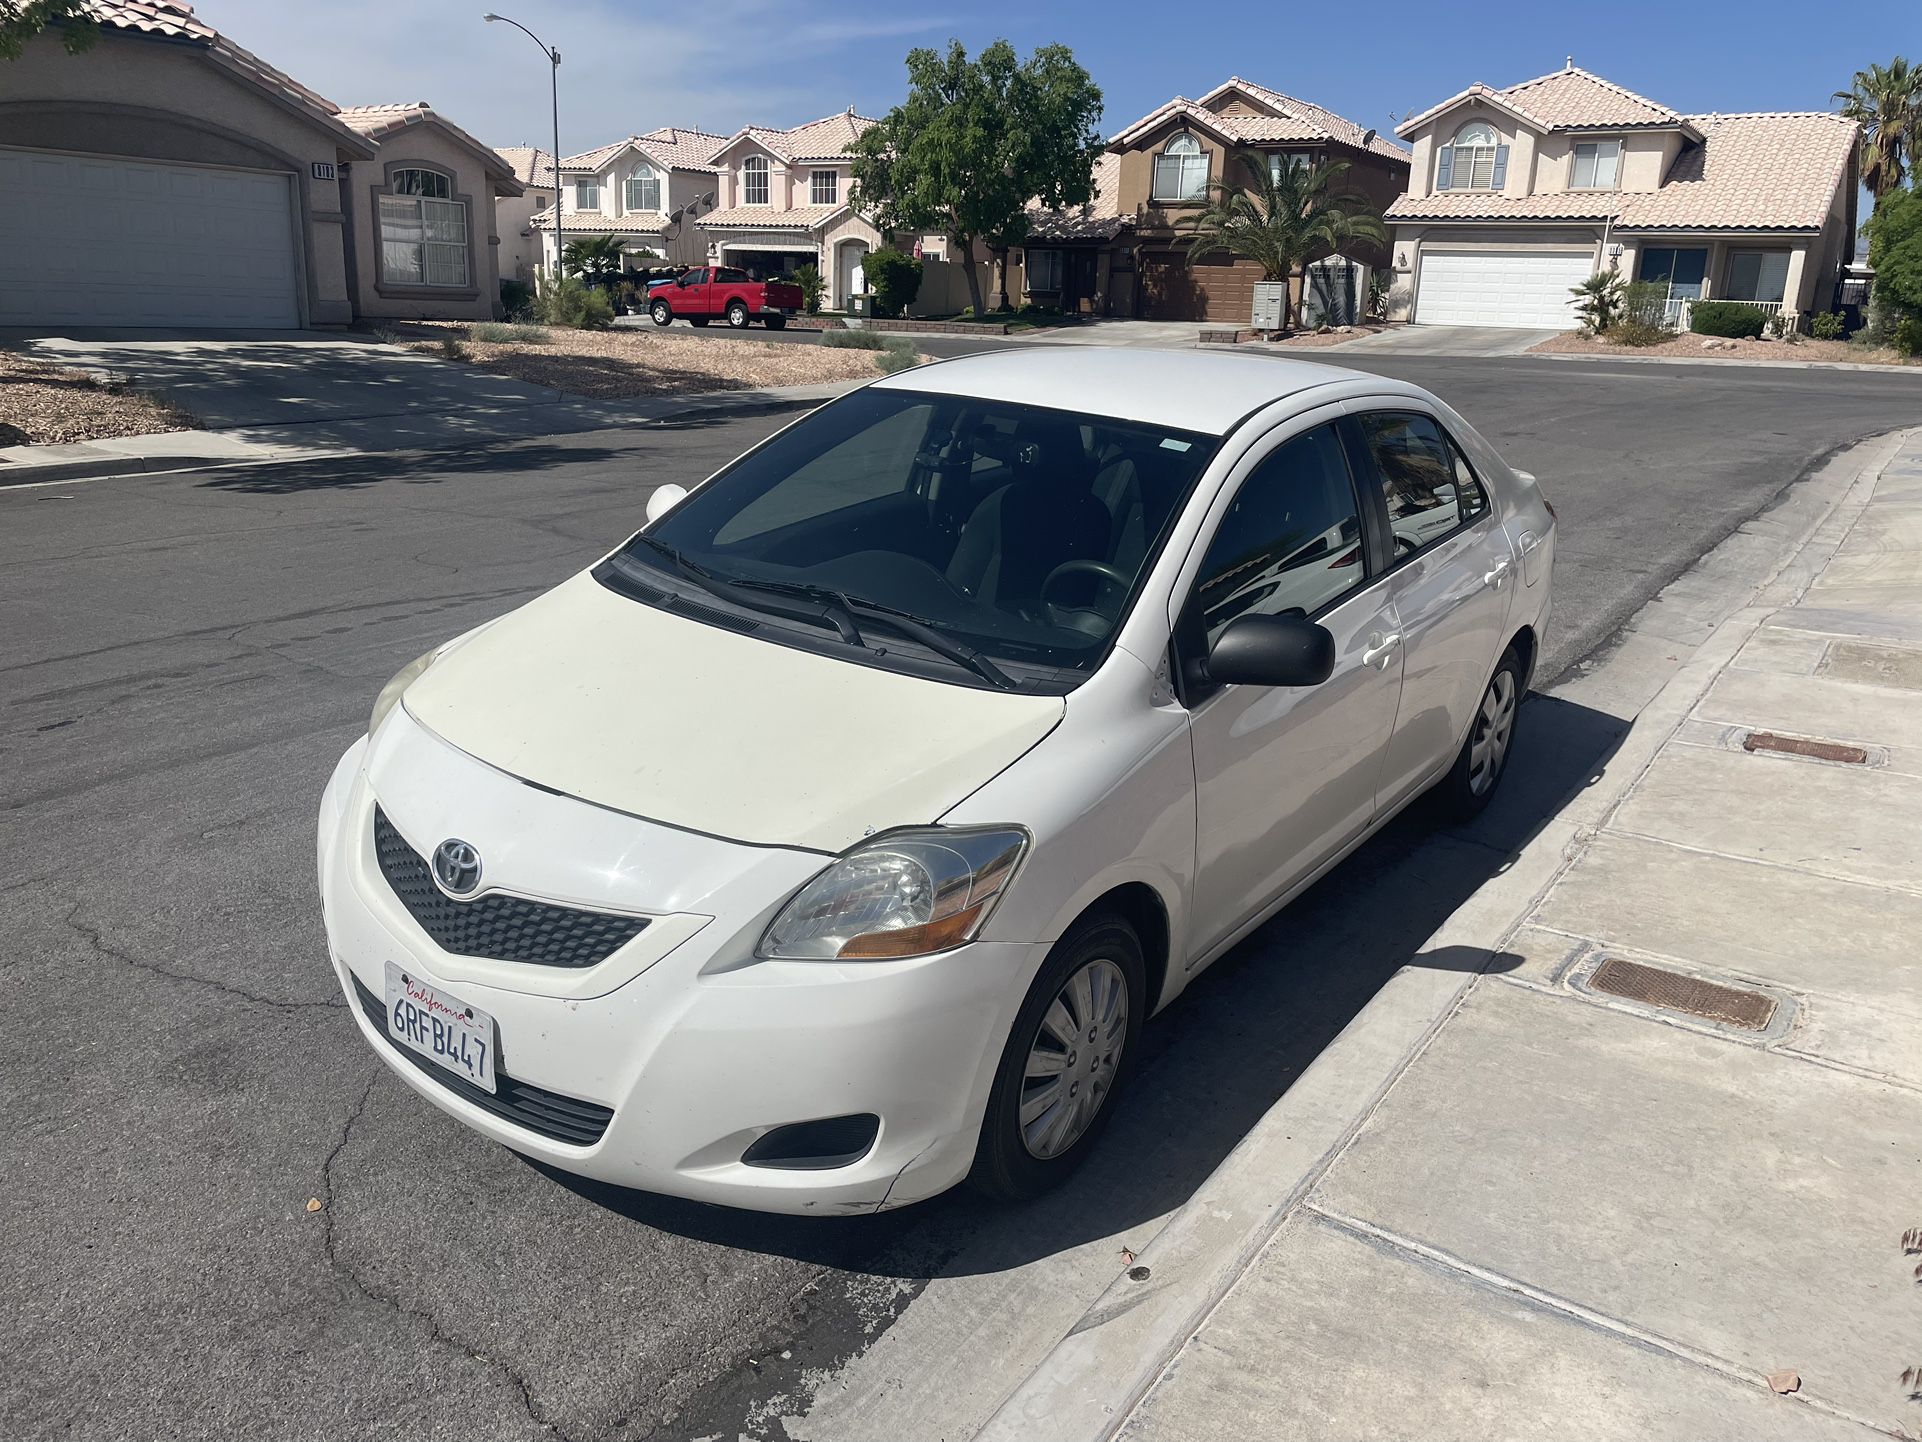 2011 Toyota Yaris for sale. Private owner.  Mileage 199,200  Very Good condition.  Clean Title Passed Smog 03/2023  Bought a new car and need to sell.